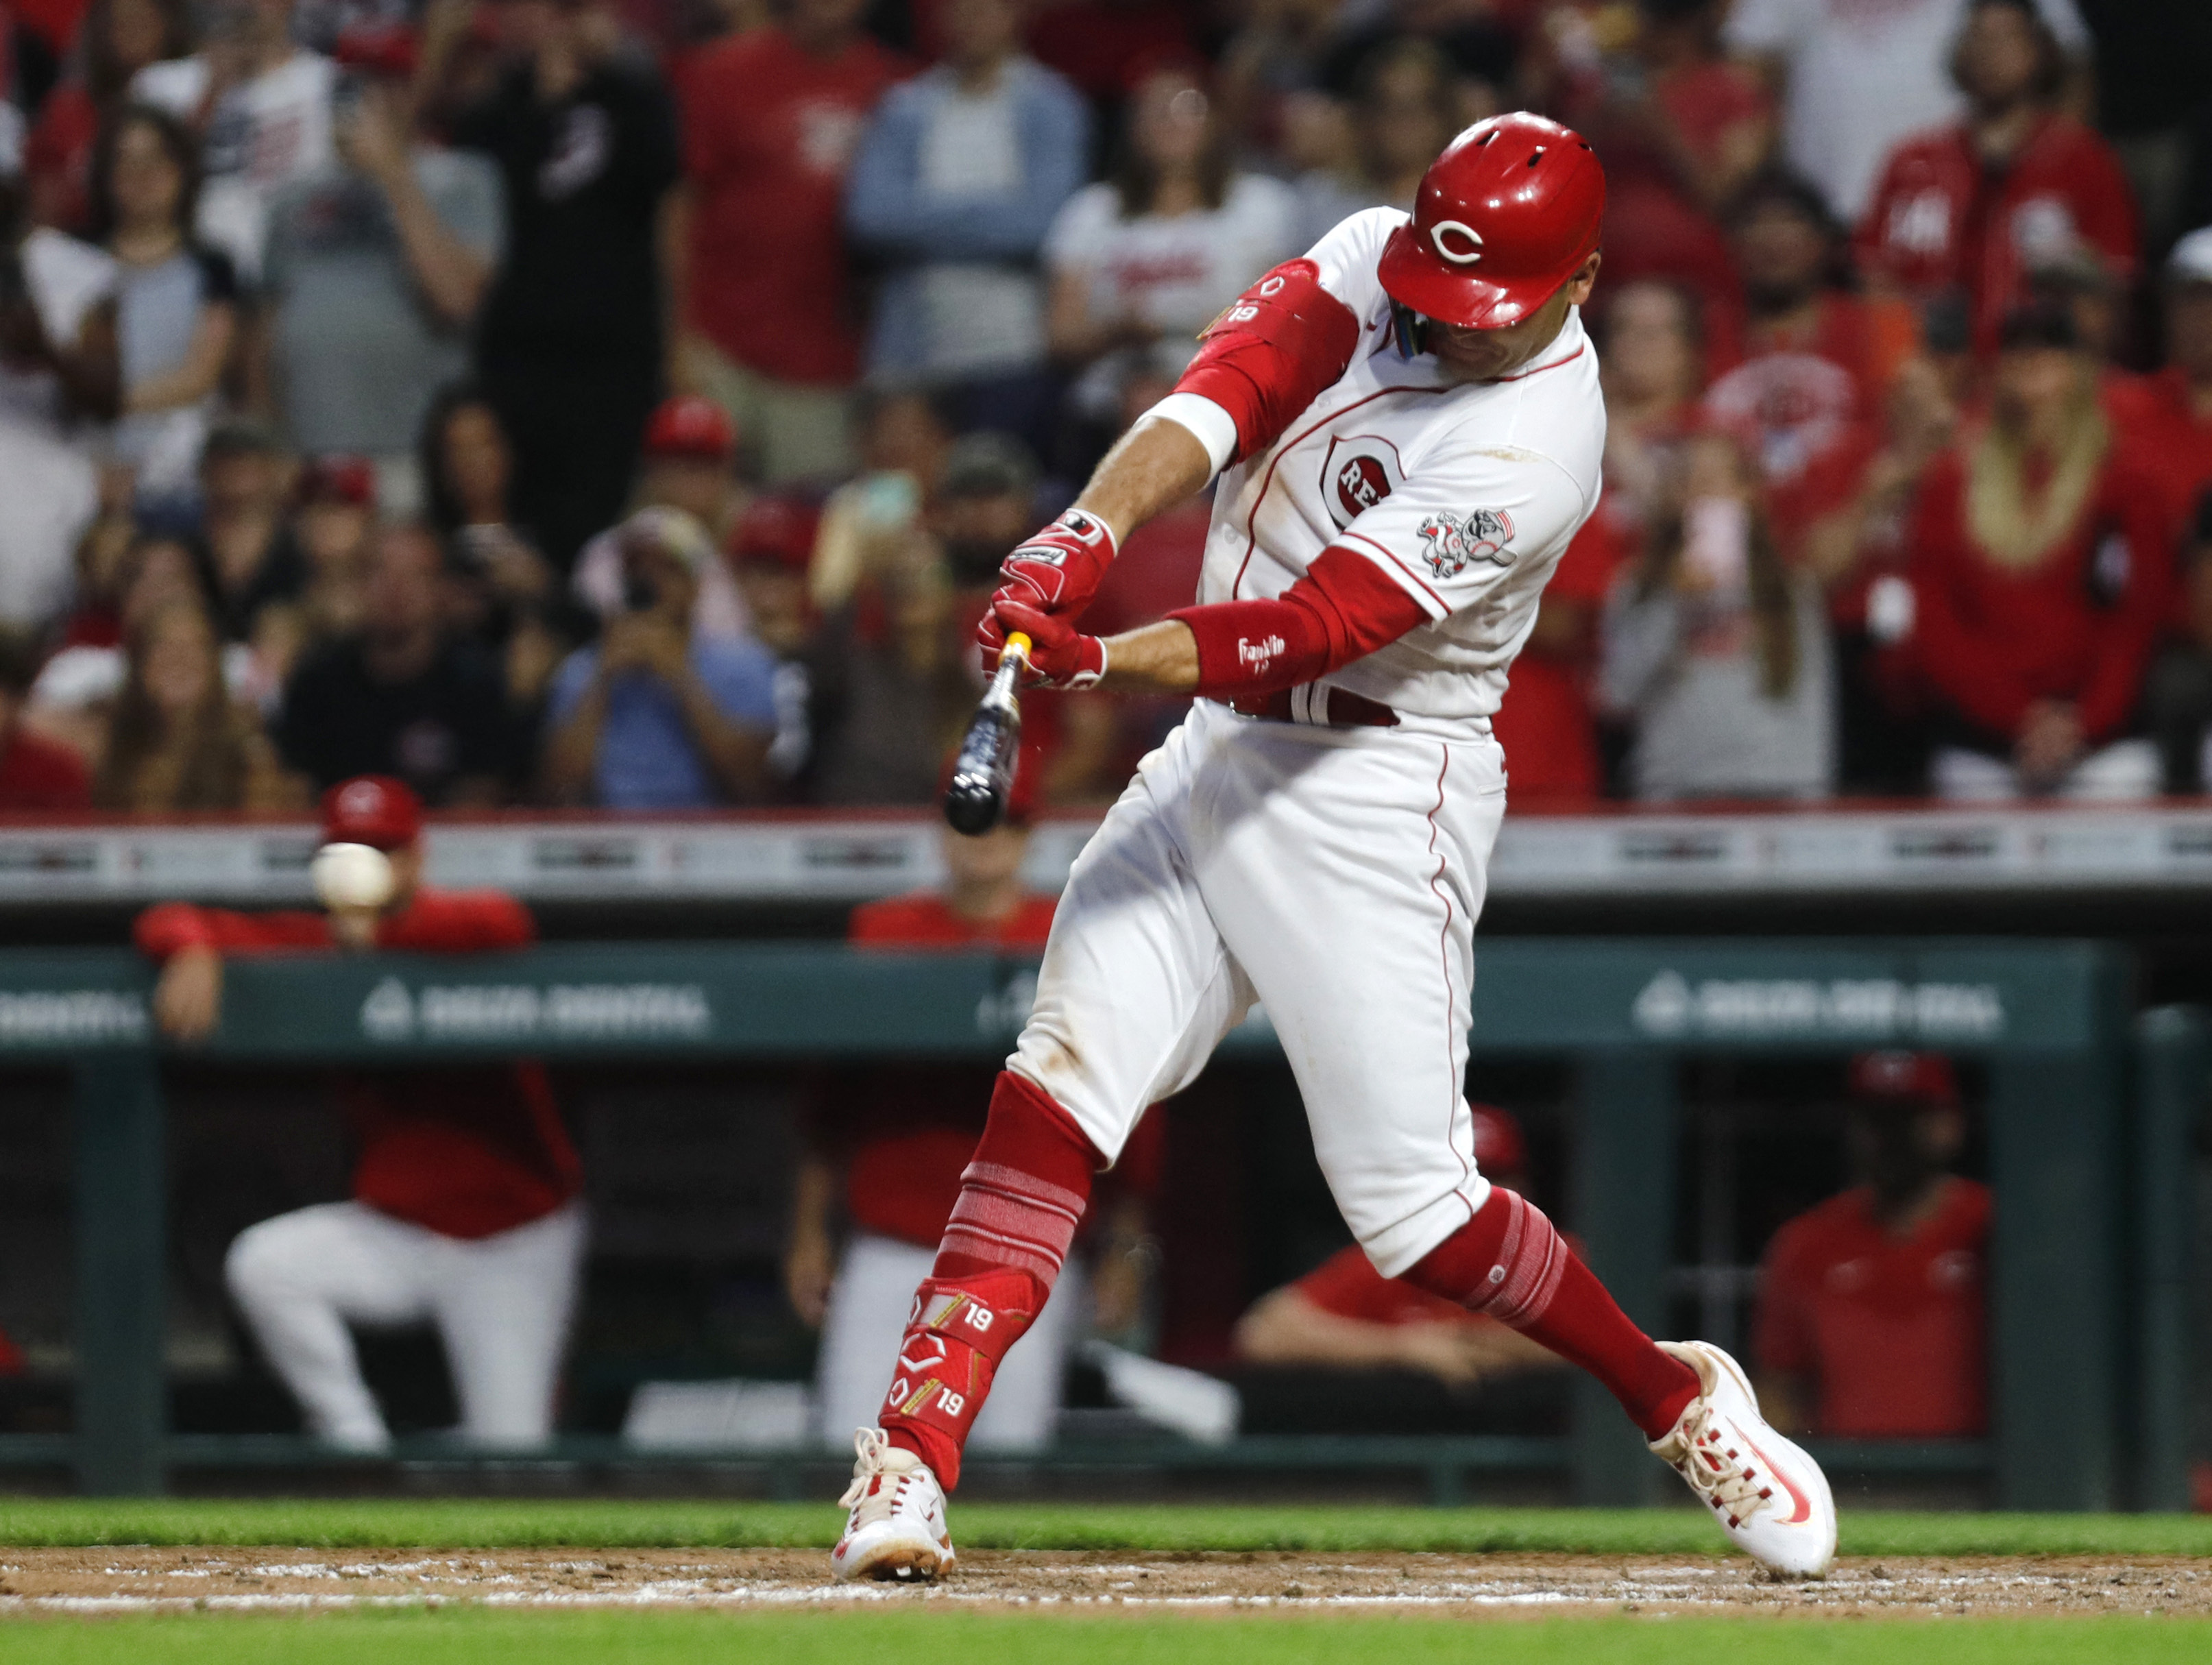 Reds look to even home series against Brewers